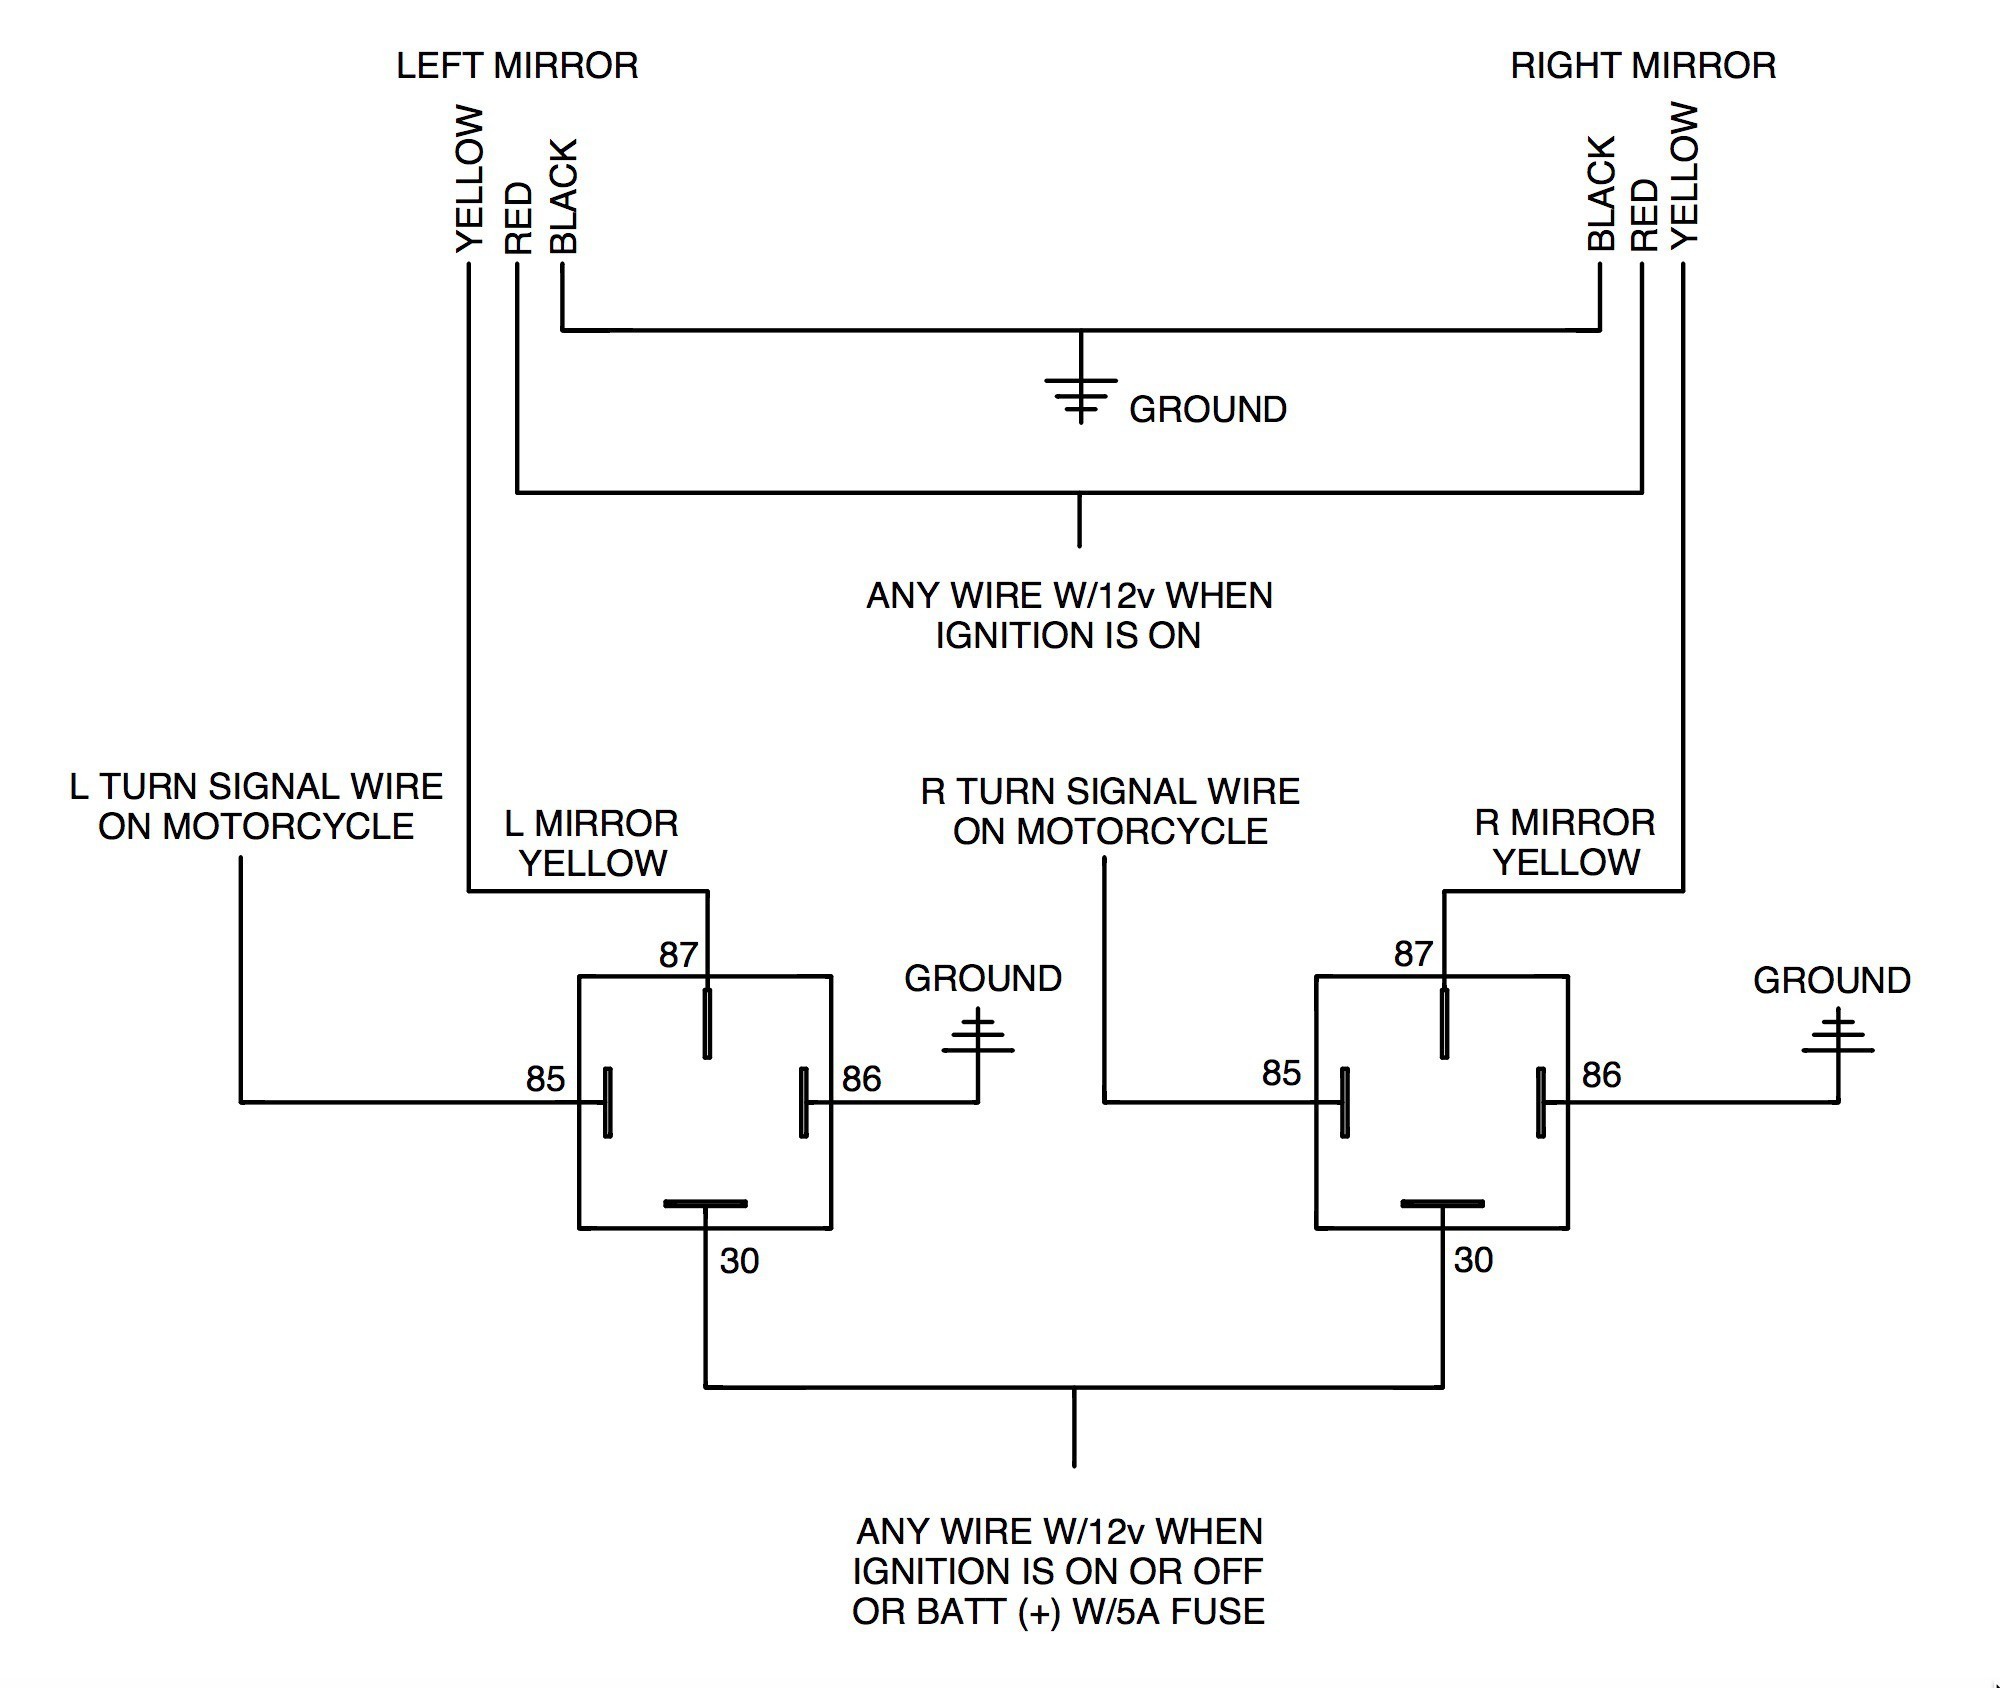 Motorcycle Turn Signal Wiring Diagram from mainetreasurechest.com